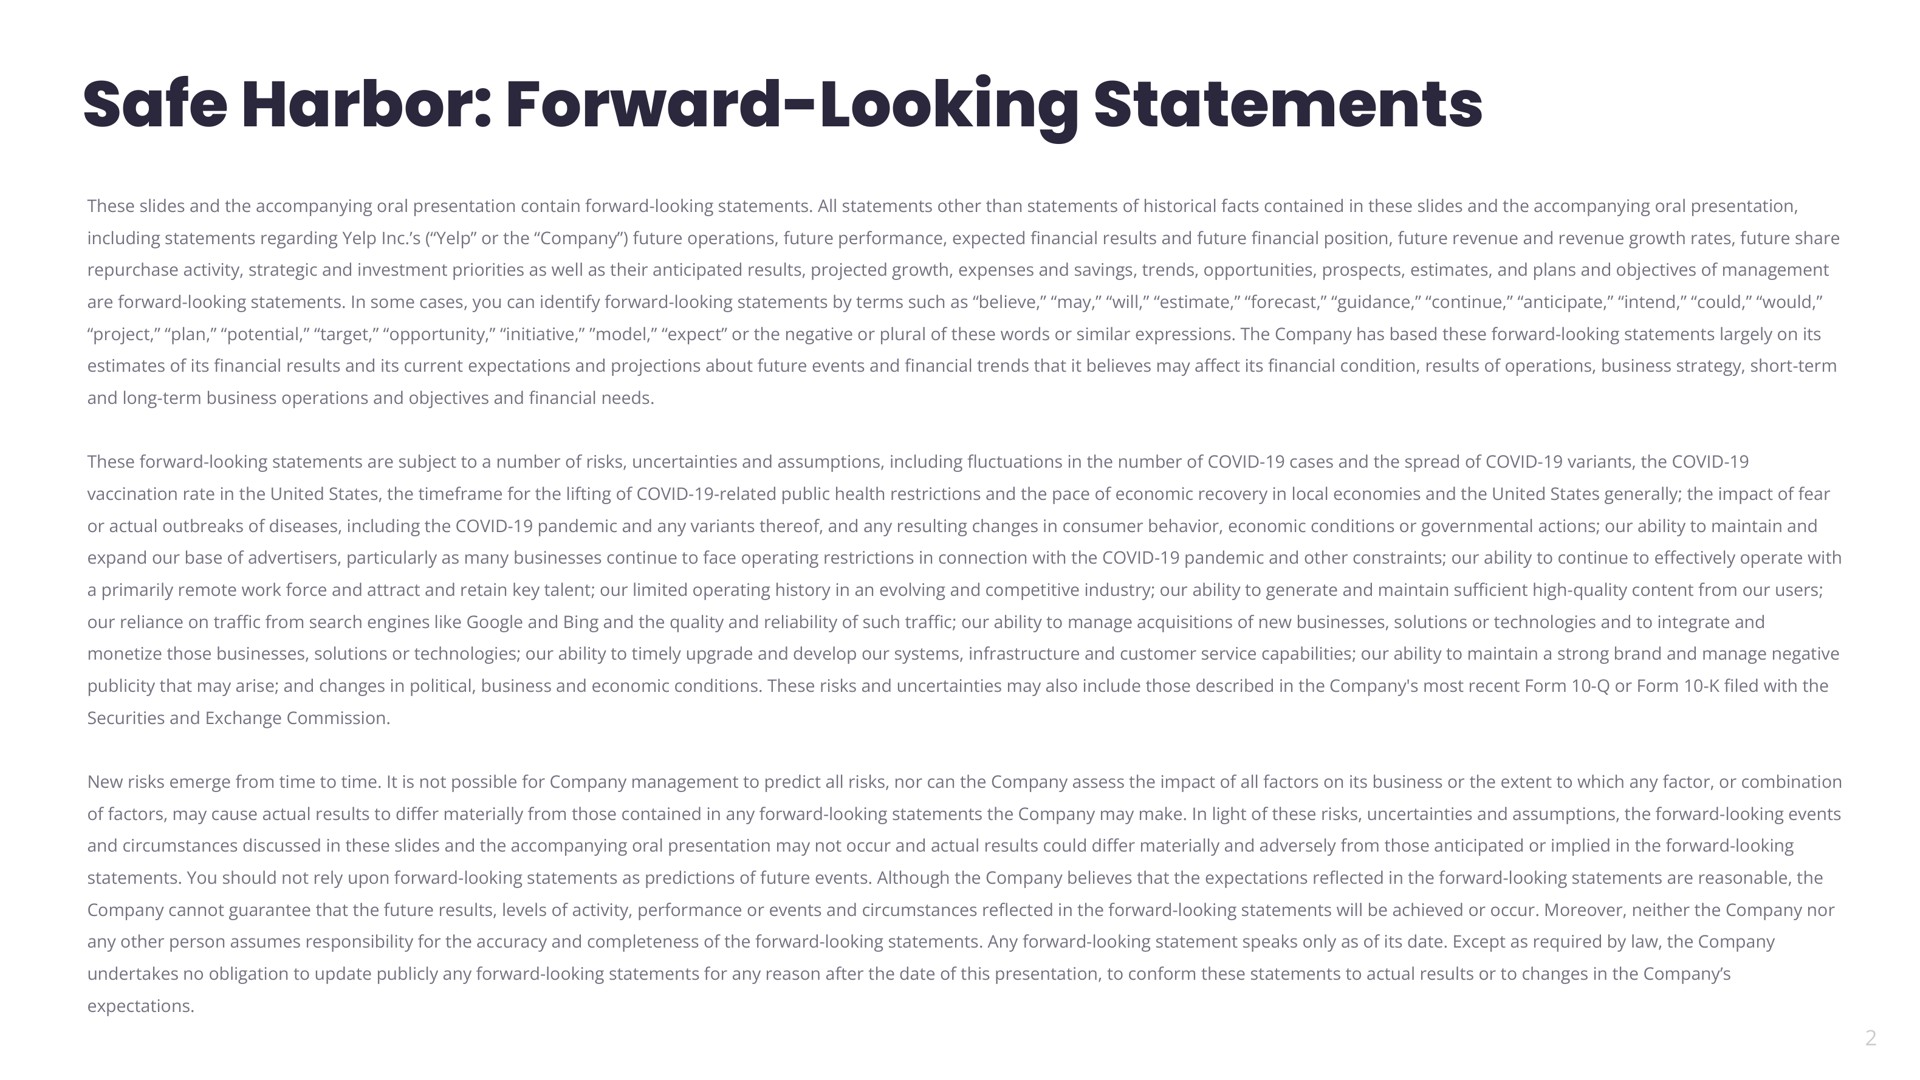 safe harbor forward looking statements | Yelp